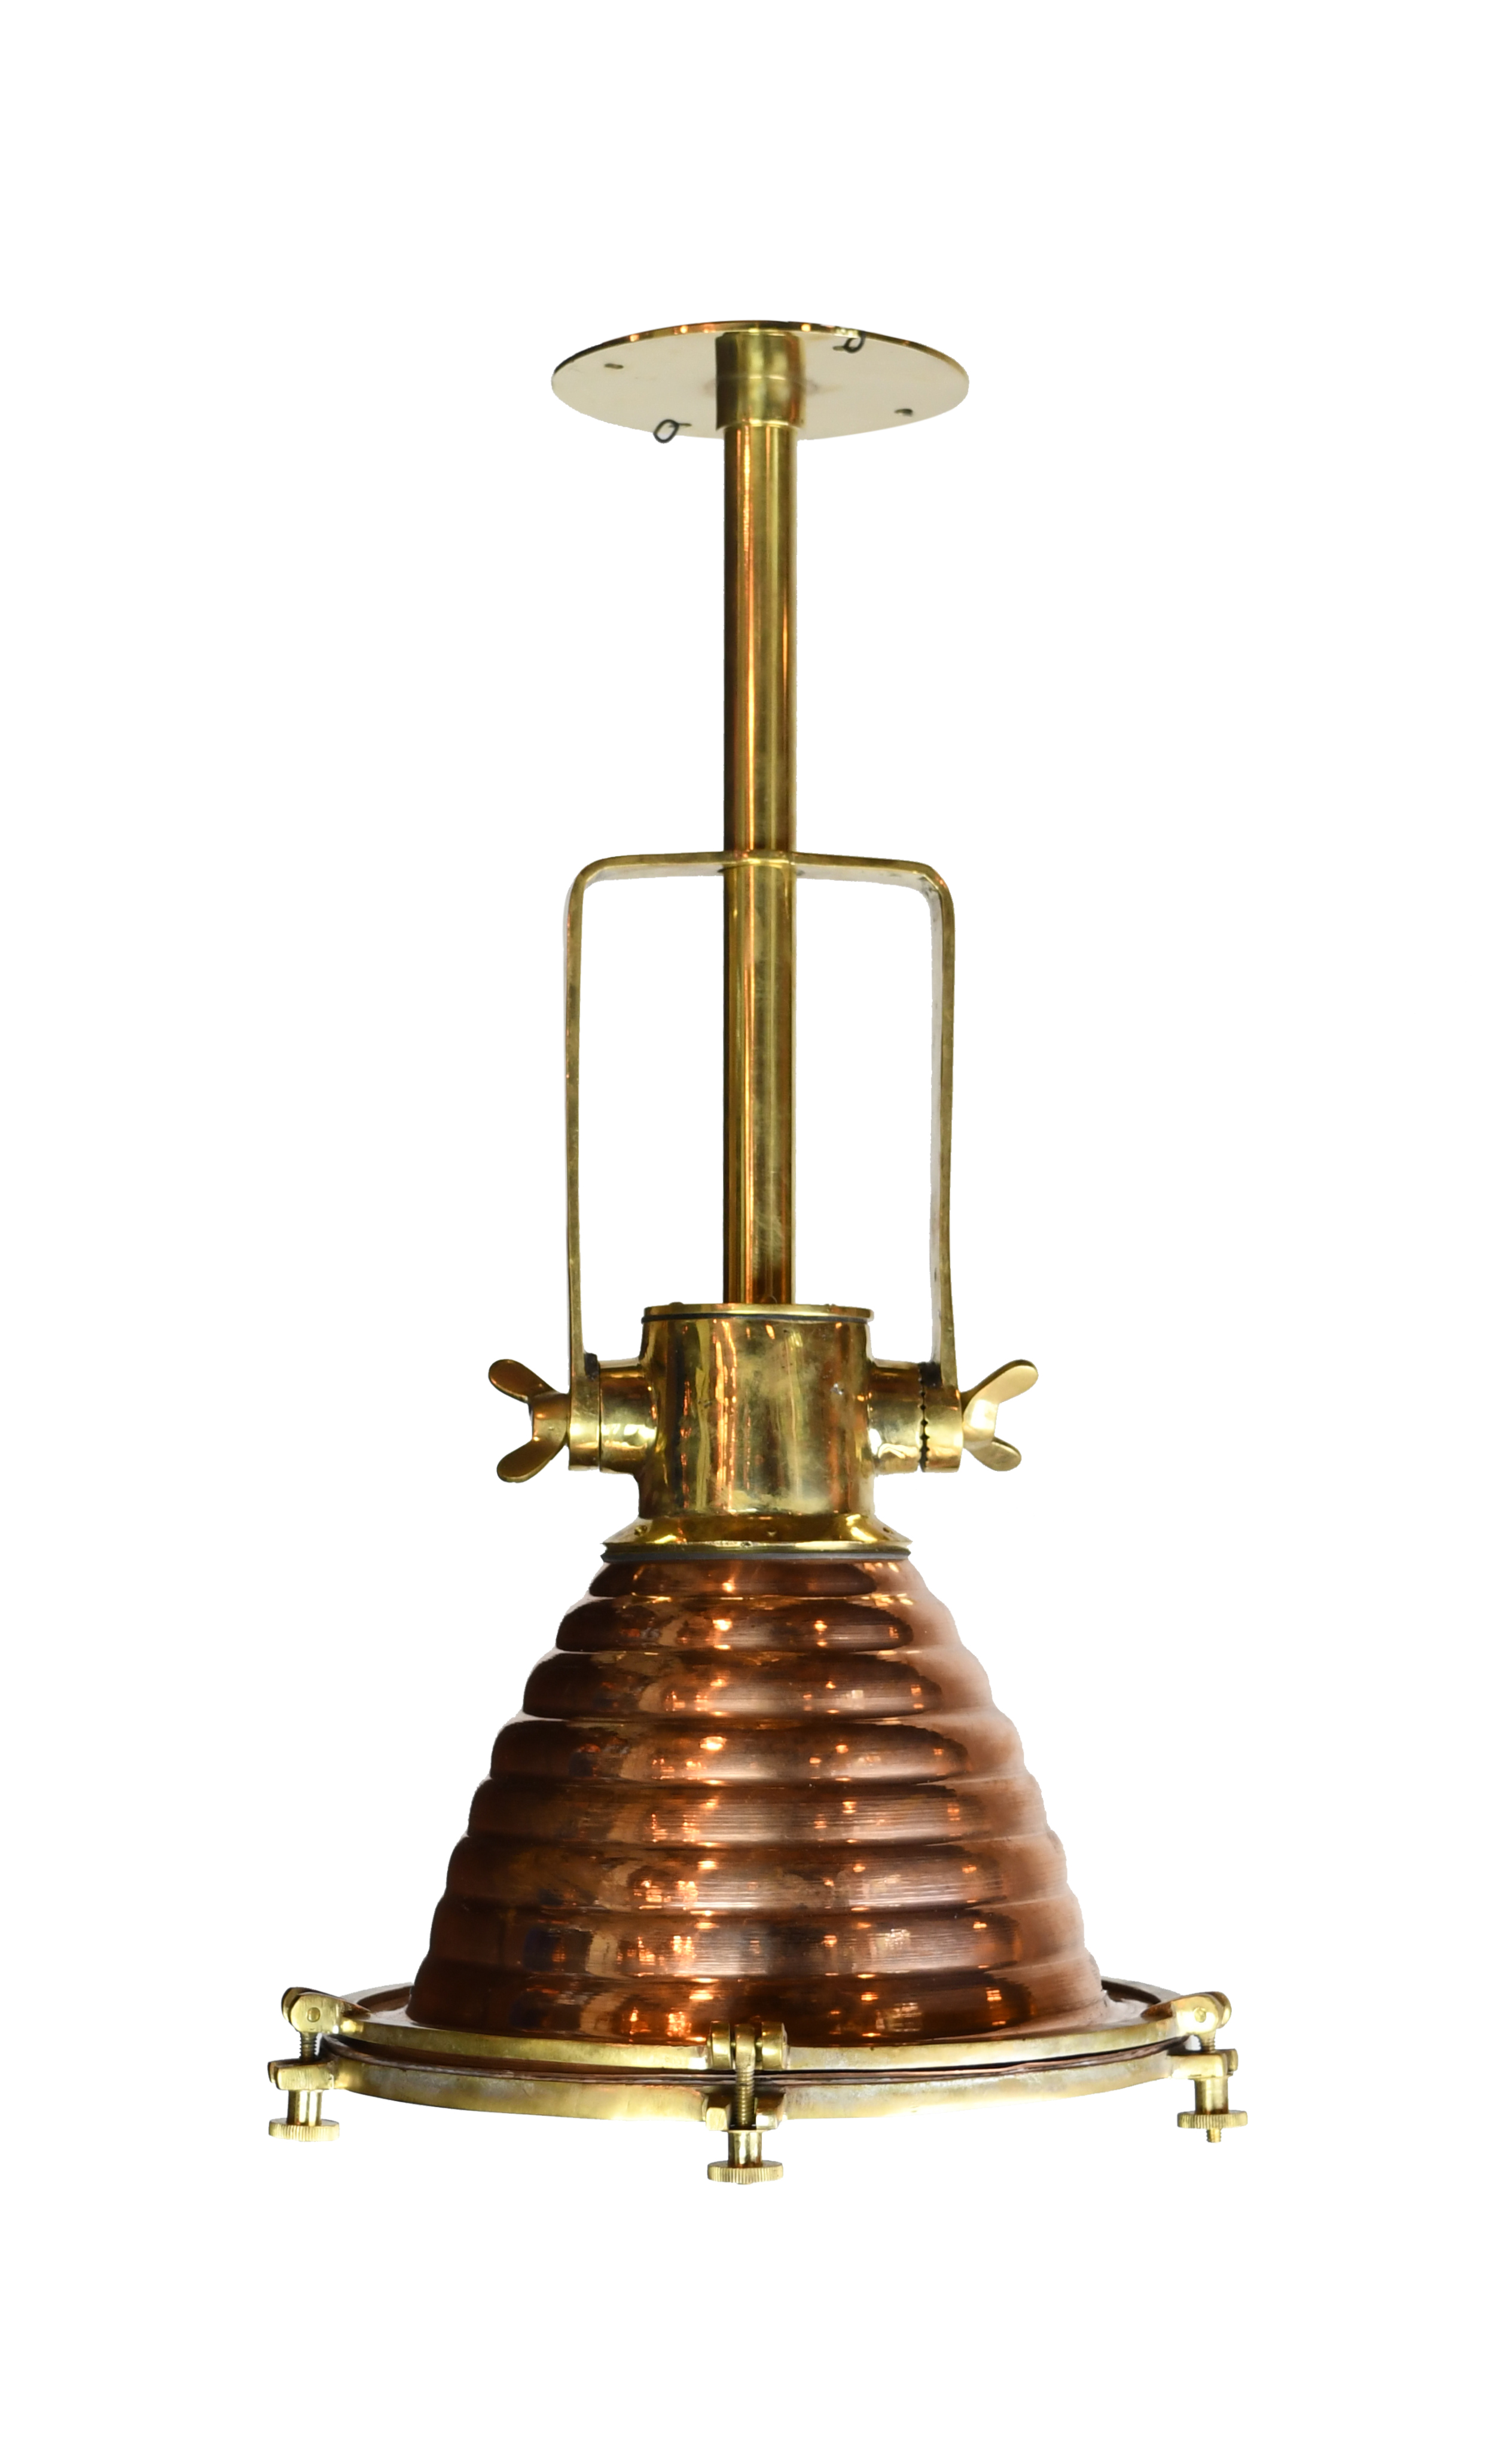 copper/brass beehive boat light — ARCHITECTURAL ANTIQUES